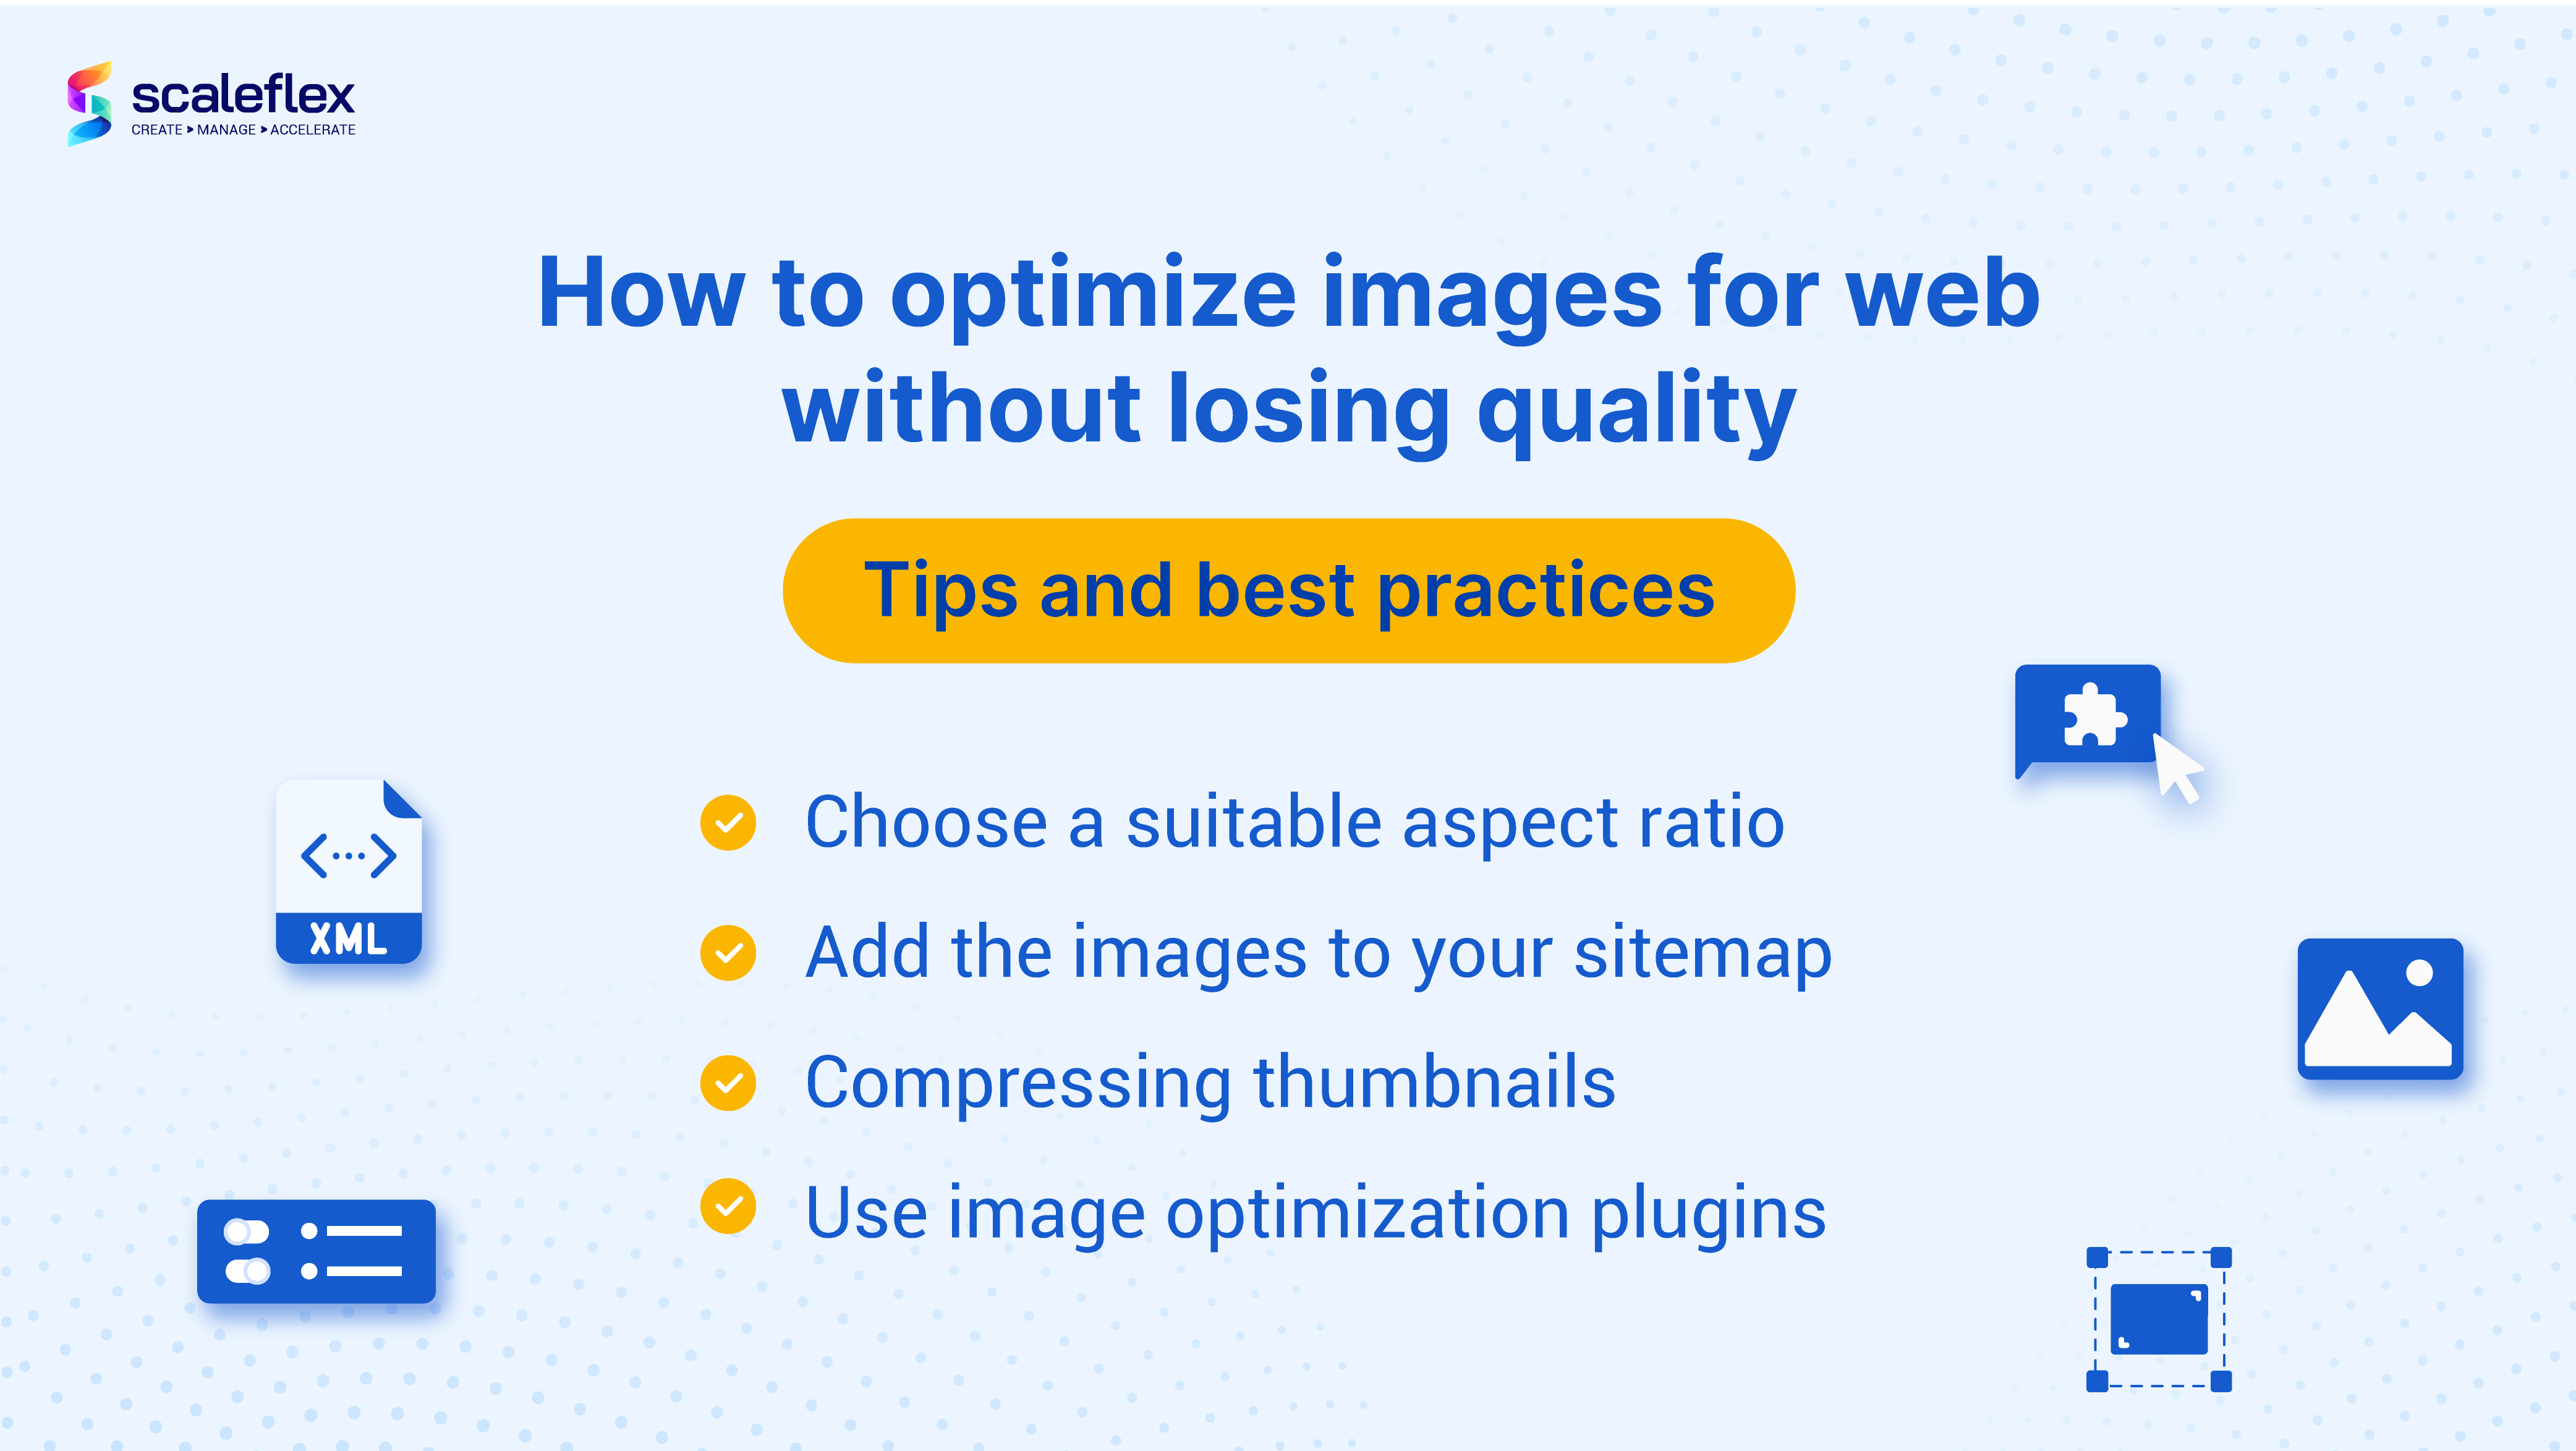 The tips and best practices for optimizing your website images without losing the quality